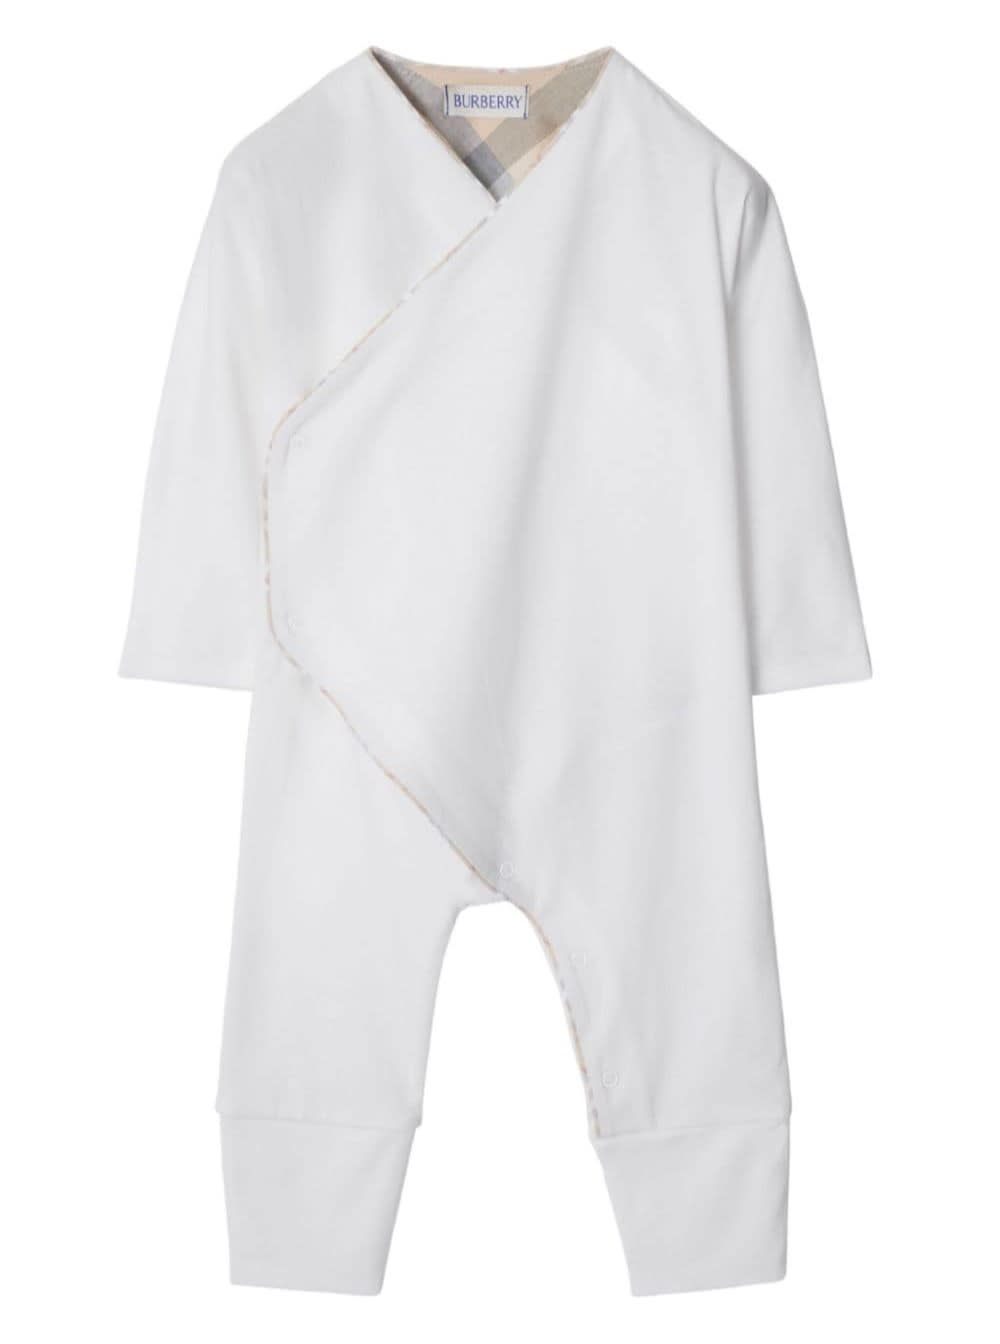 Burberry Babies' N7 Rizzo Set In White